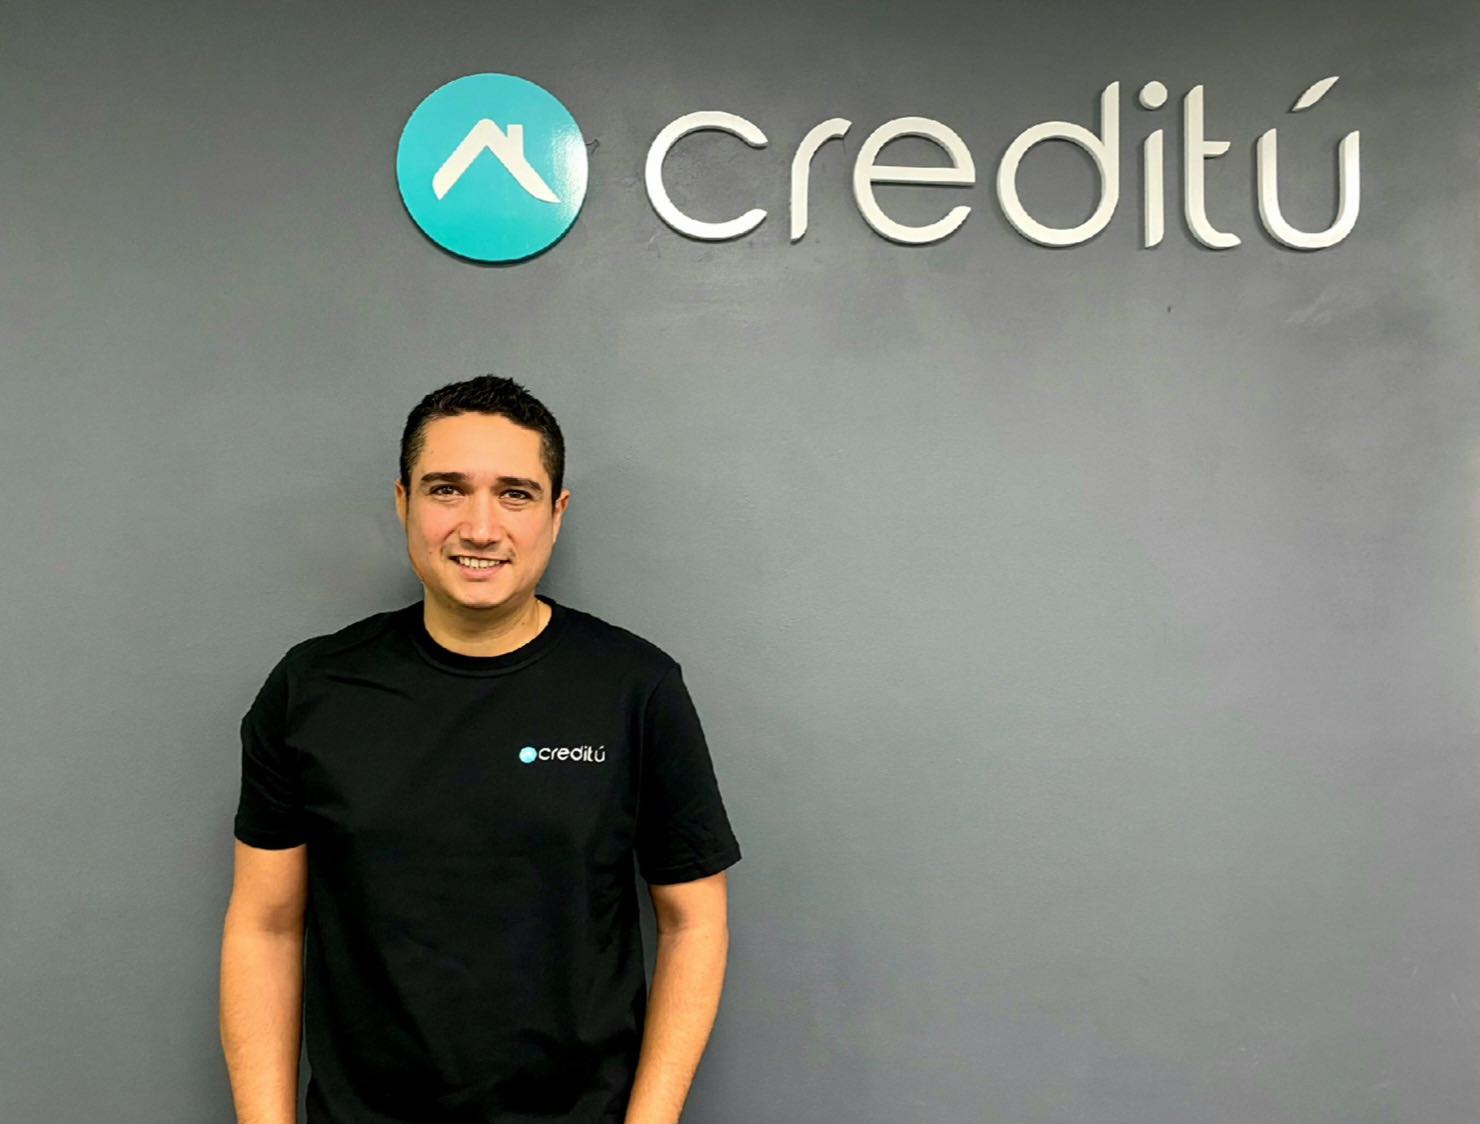 Creditú, the Chilean fintech that is changing lives in LatAm by democratising access to finance